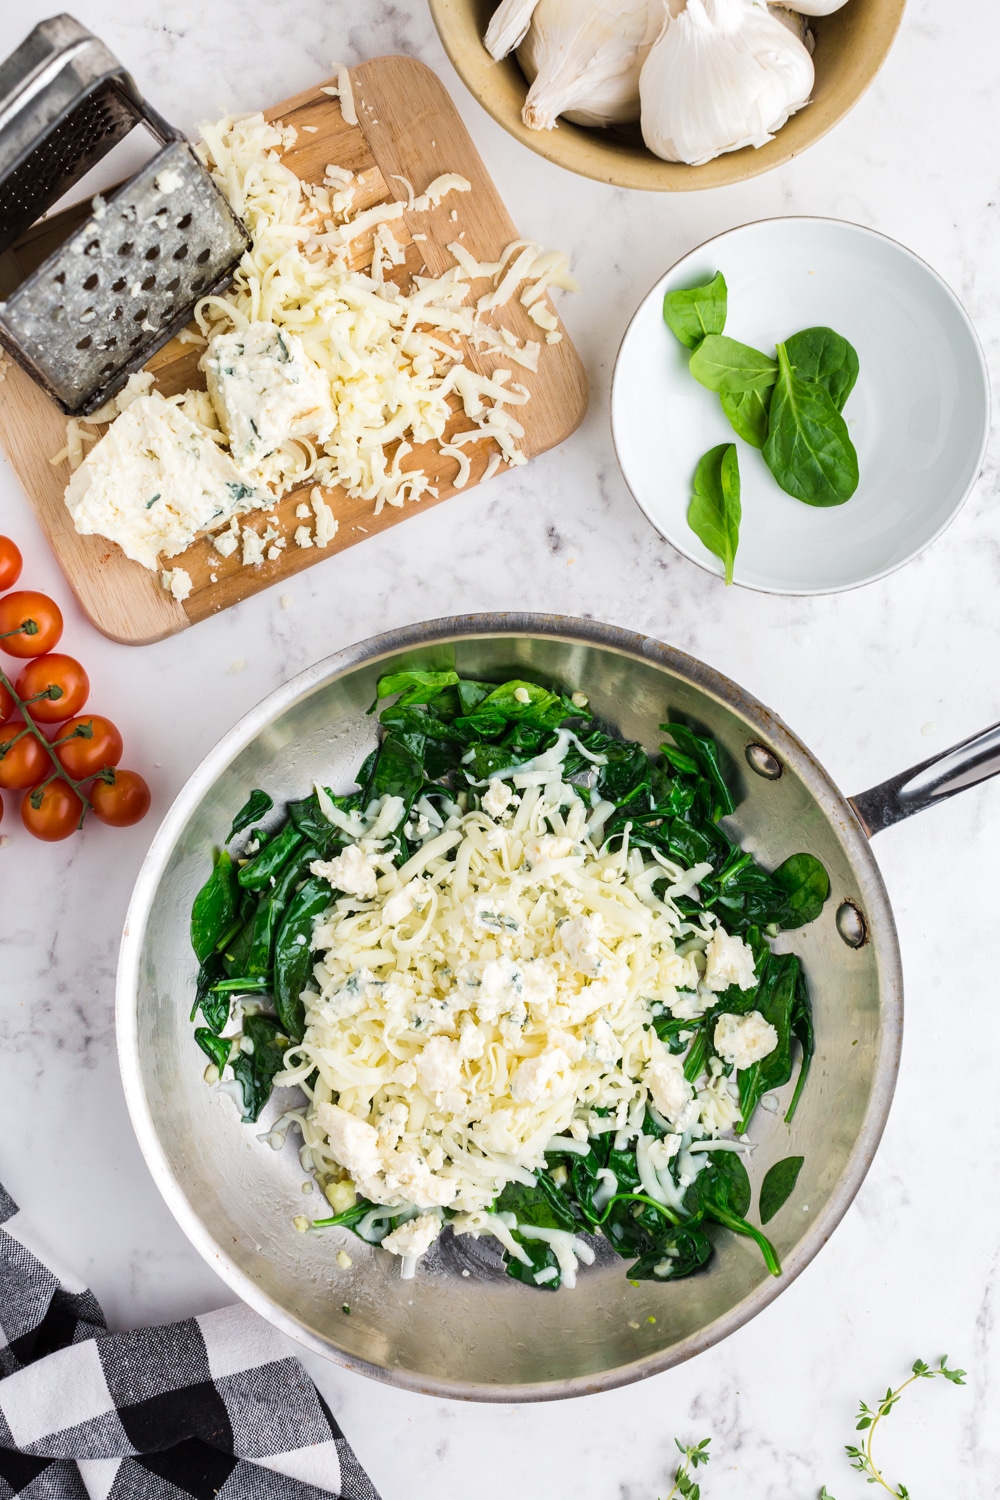 Spinach Garlic Butter and grated cheese in a Skillet, cheese, grated cheese, grater on a wooden kitchen board, bowl with spinach leaves, cherry tomatoes, black and white checked kitchen towel, bowl of garlic cloves, on white marble countertop